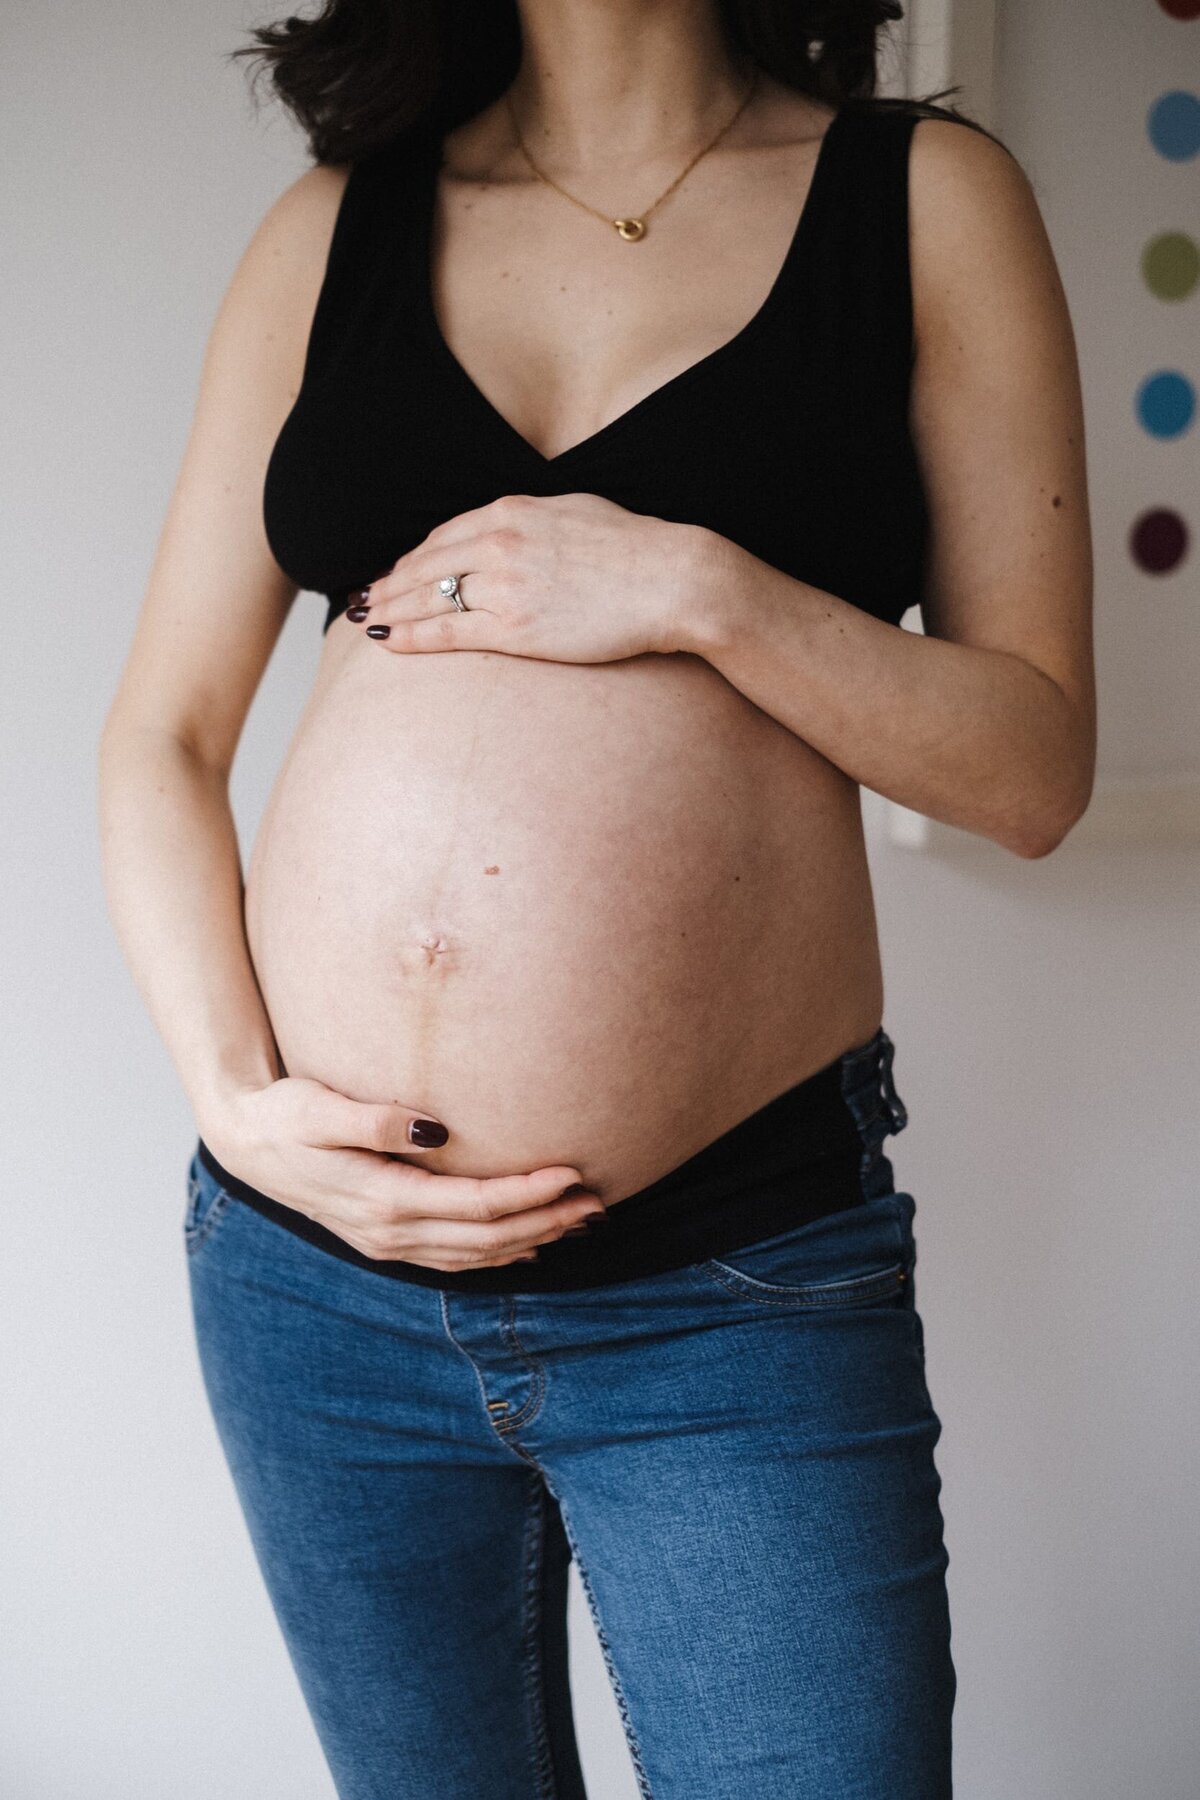 Pregnant woman in black bra and jeans holding her baby bump